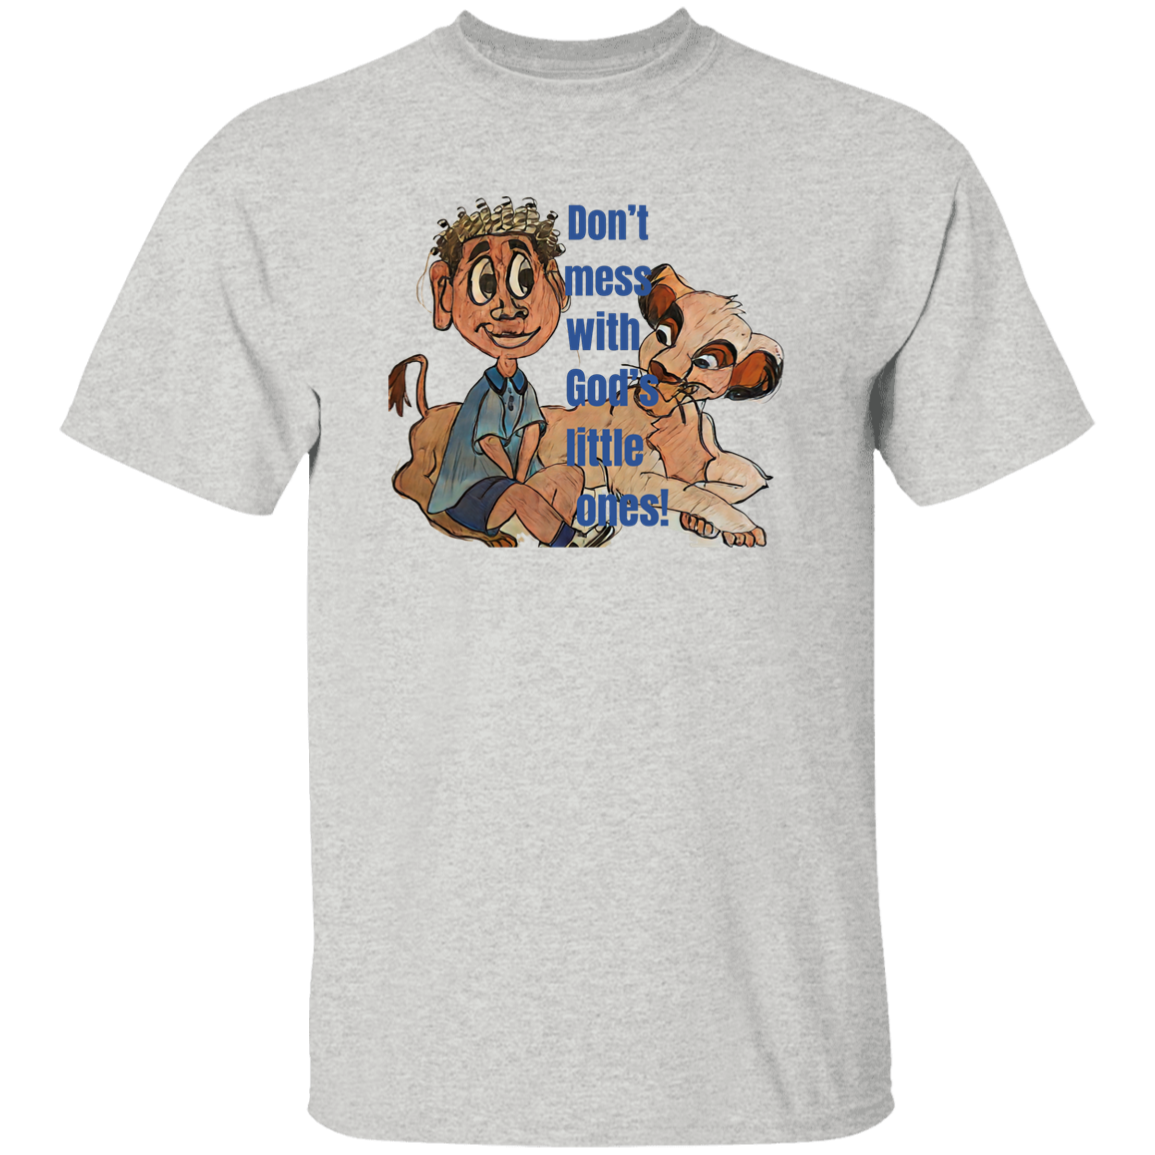 Don't mess with God's little ones Youth 5.3 oz 100% Cotton T-Shirt